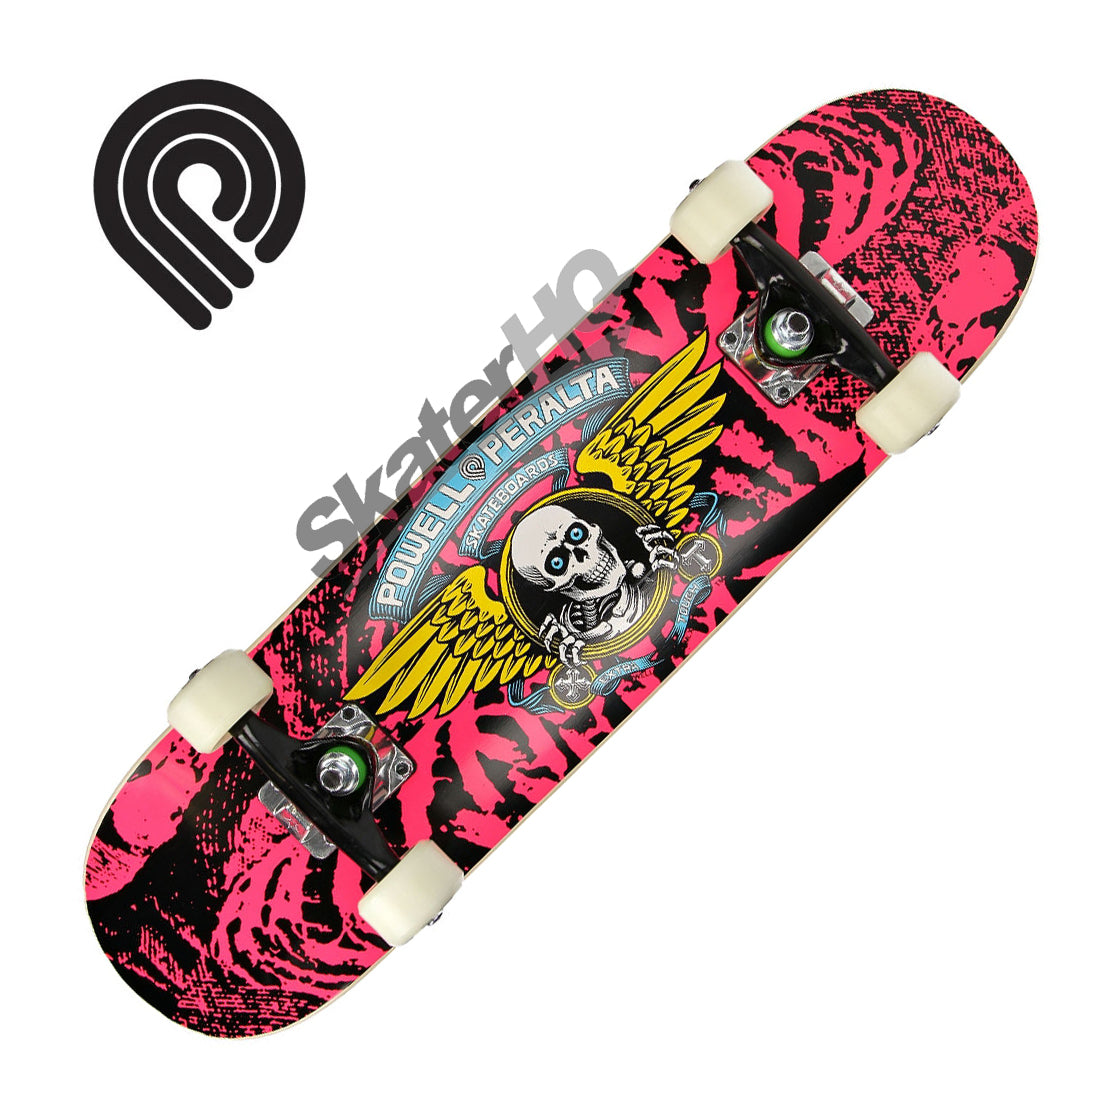 Powell Peralta Winged Ripper 7.0 S Mini Complete - Pink Skateboard Completes Modern Street